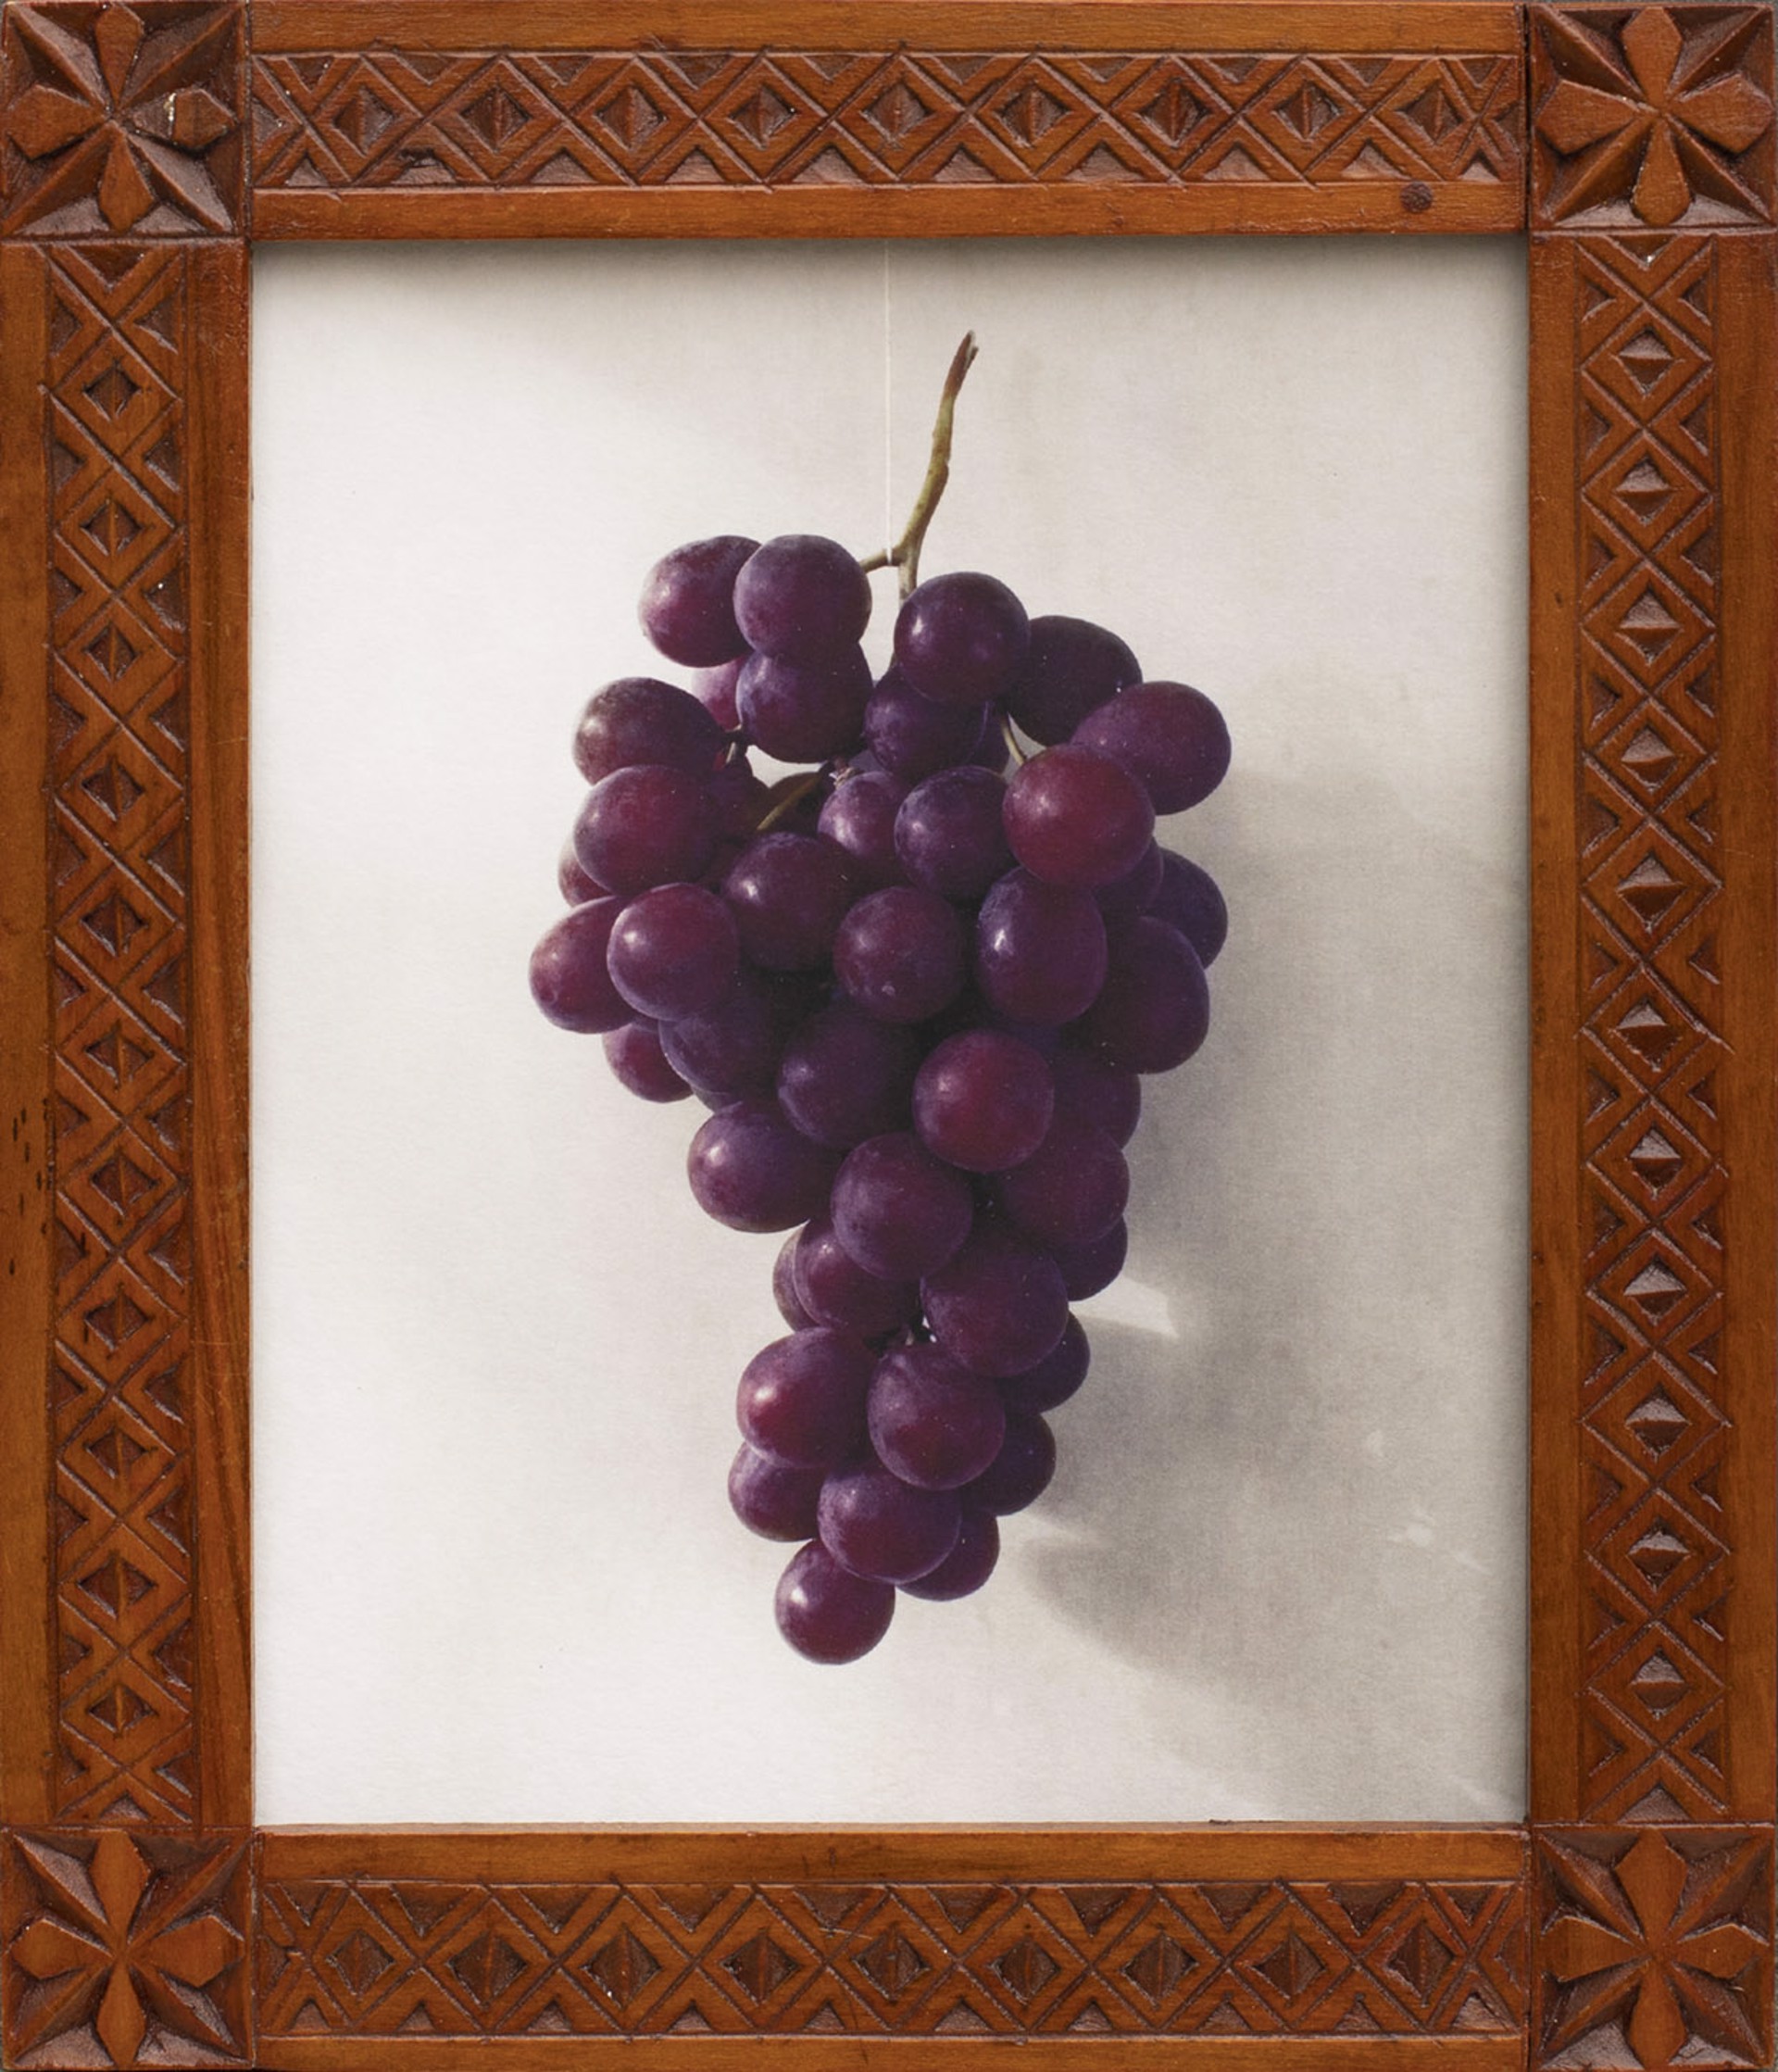 Still Life with Grapes by Jefferson Hayman